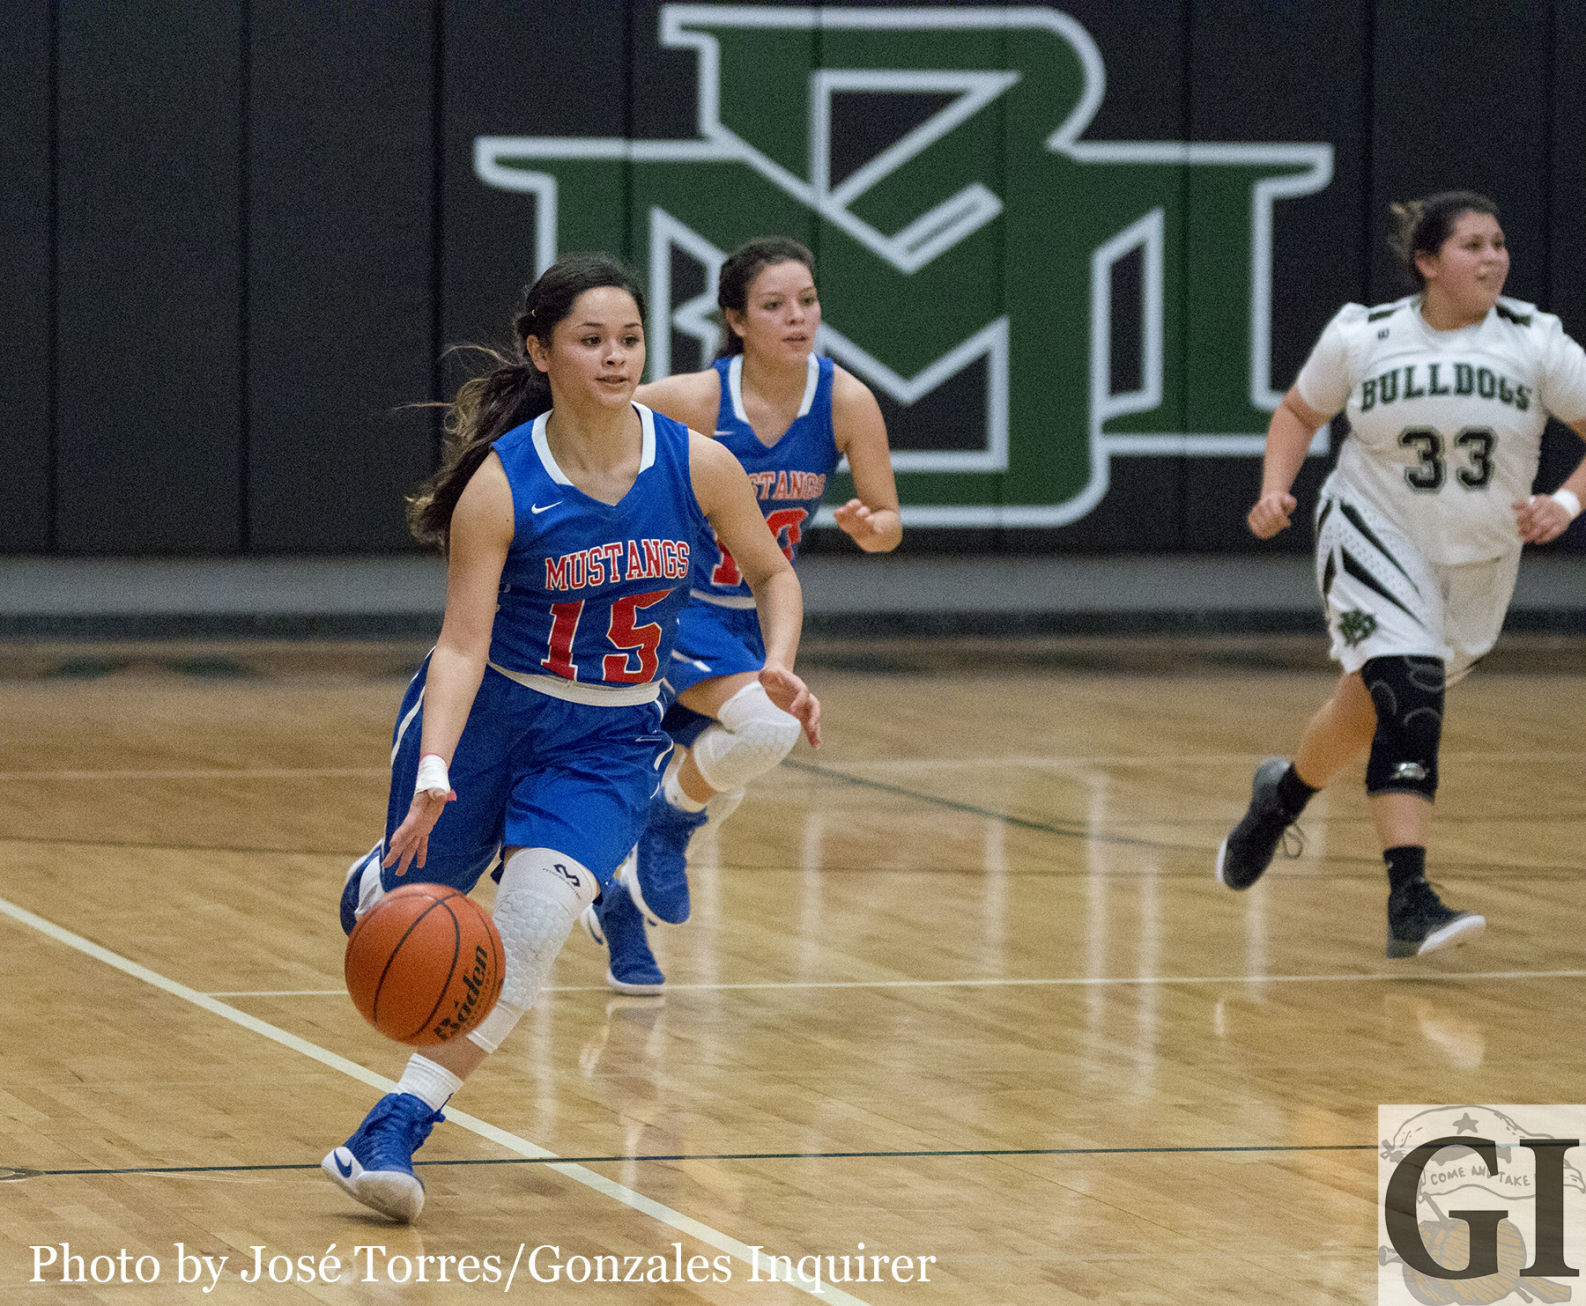 Celeste Arriaga (15) hopes her dedication to the game and her relentless work ethic will leave a lasting impact in the Lady Mustangs’ basketball program.